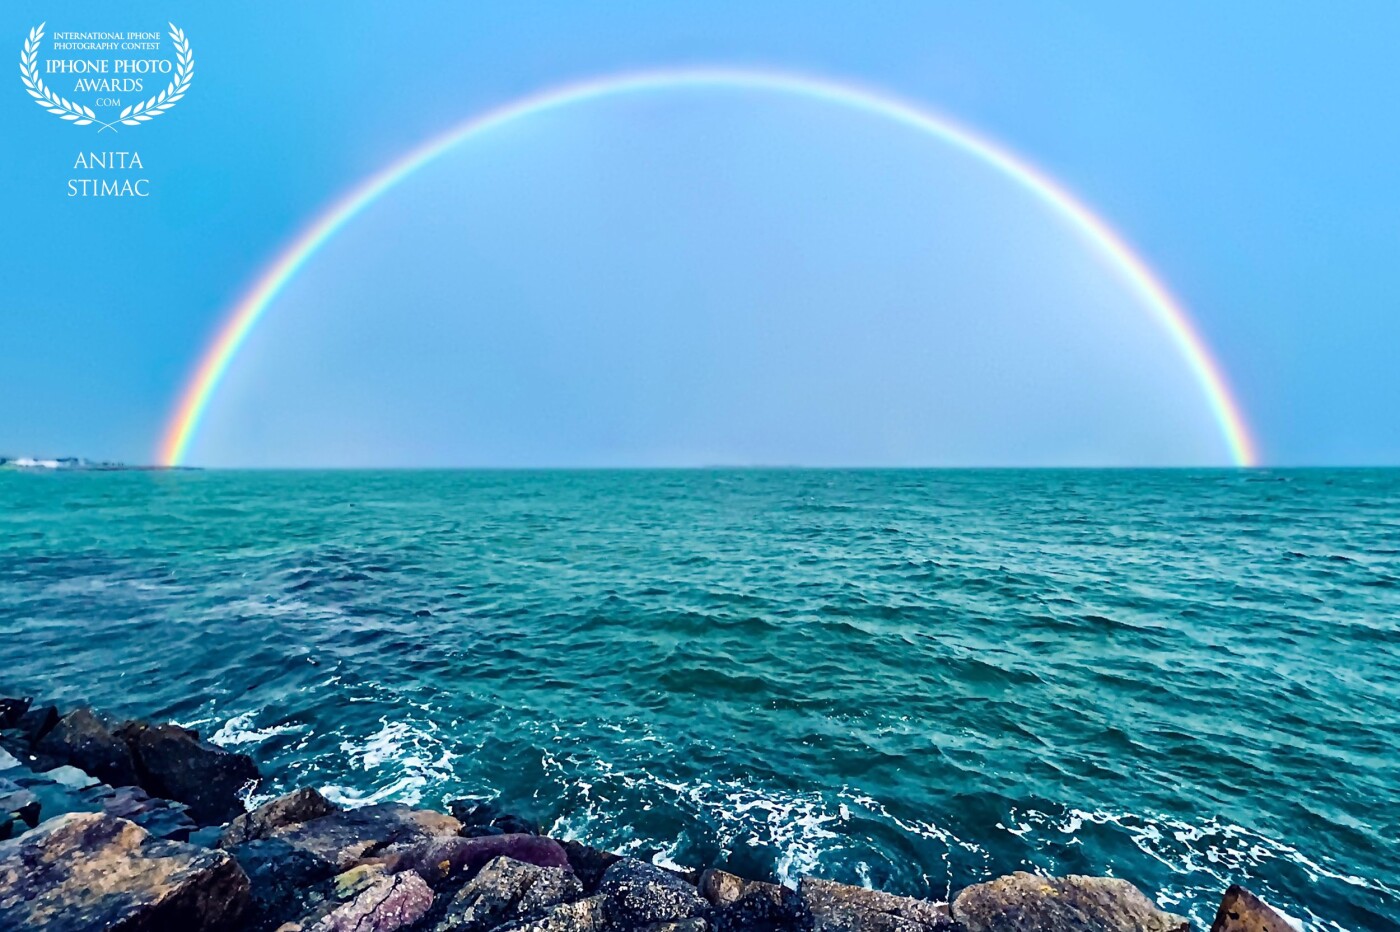 “Somewhere over the rainbow, skies are blue, and the dreams that you dare to dream really do come true.” <br />
<br />
A perfect rainbow on Galway Bay over the Atlantic Ocean.